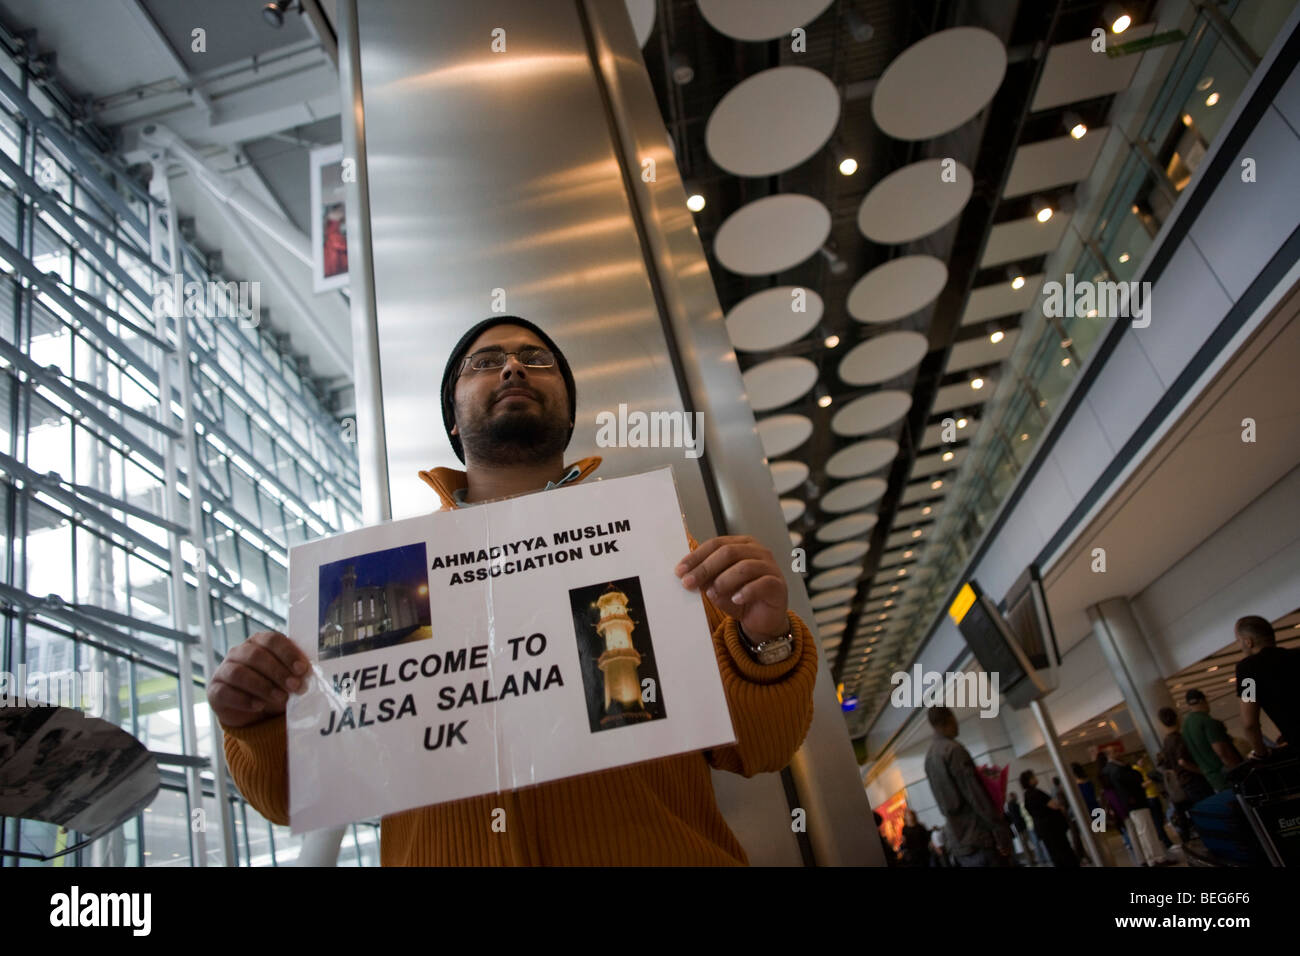 An Ahmadiyya mosque official holds a name card and awaits a fellow-Muslim in Arrivals at Heathrow airport's Terminal 5. Stock Photo